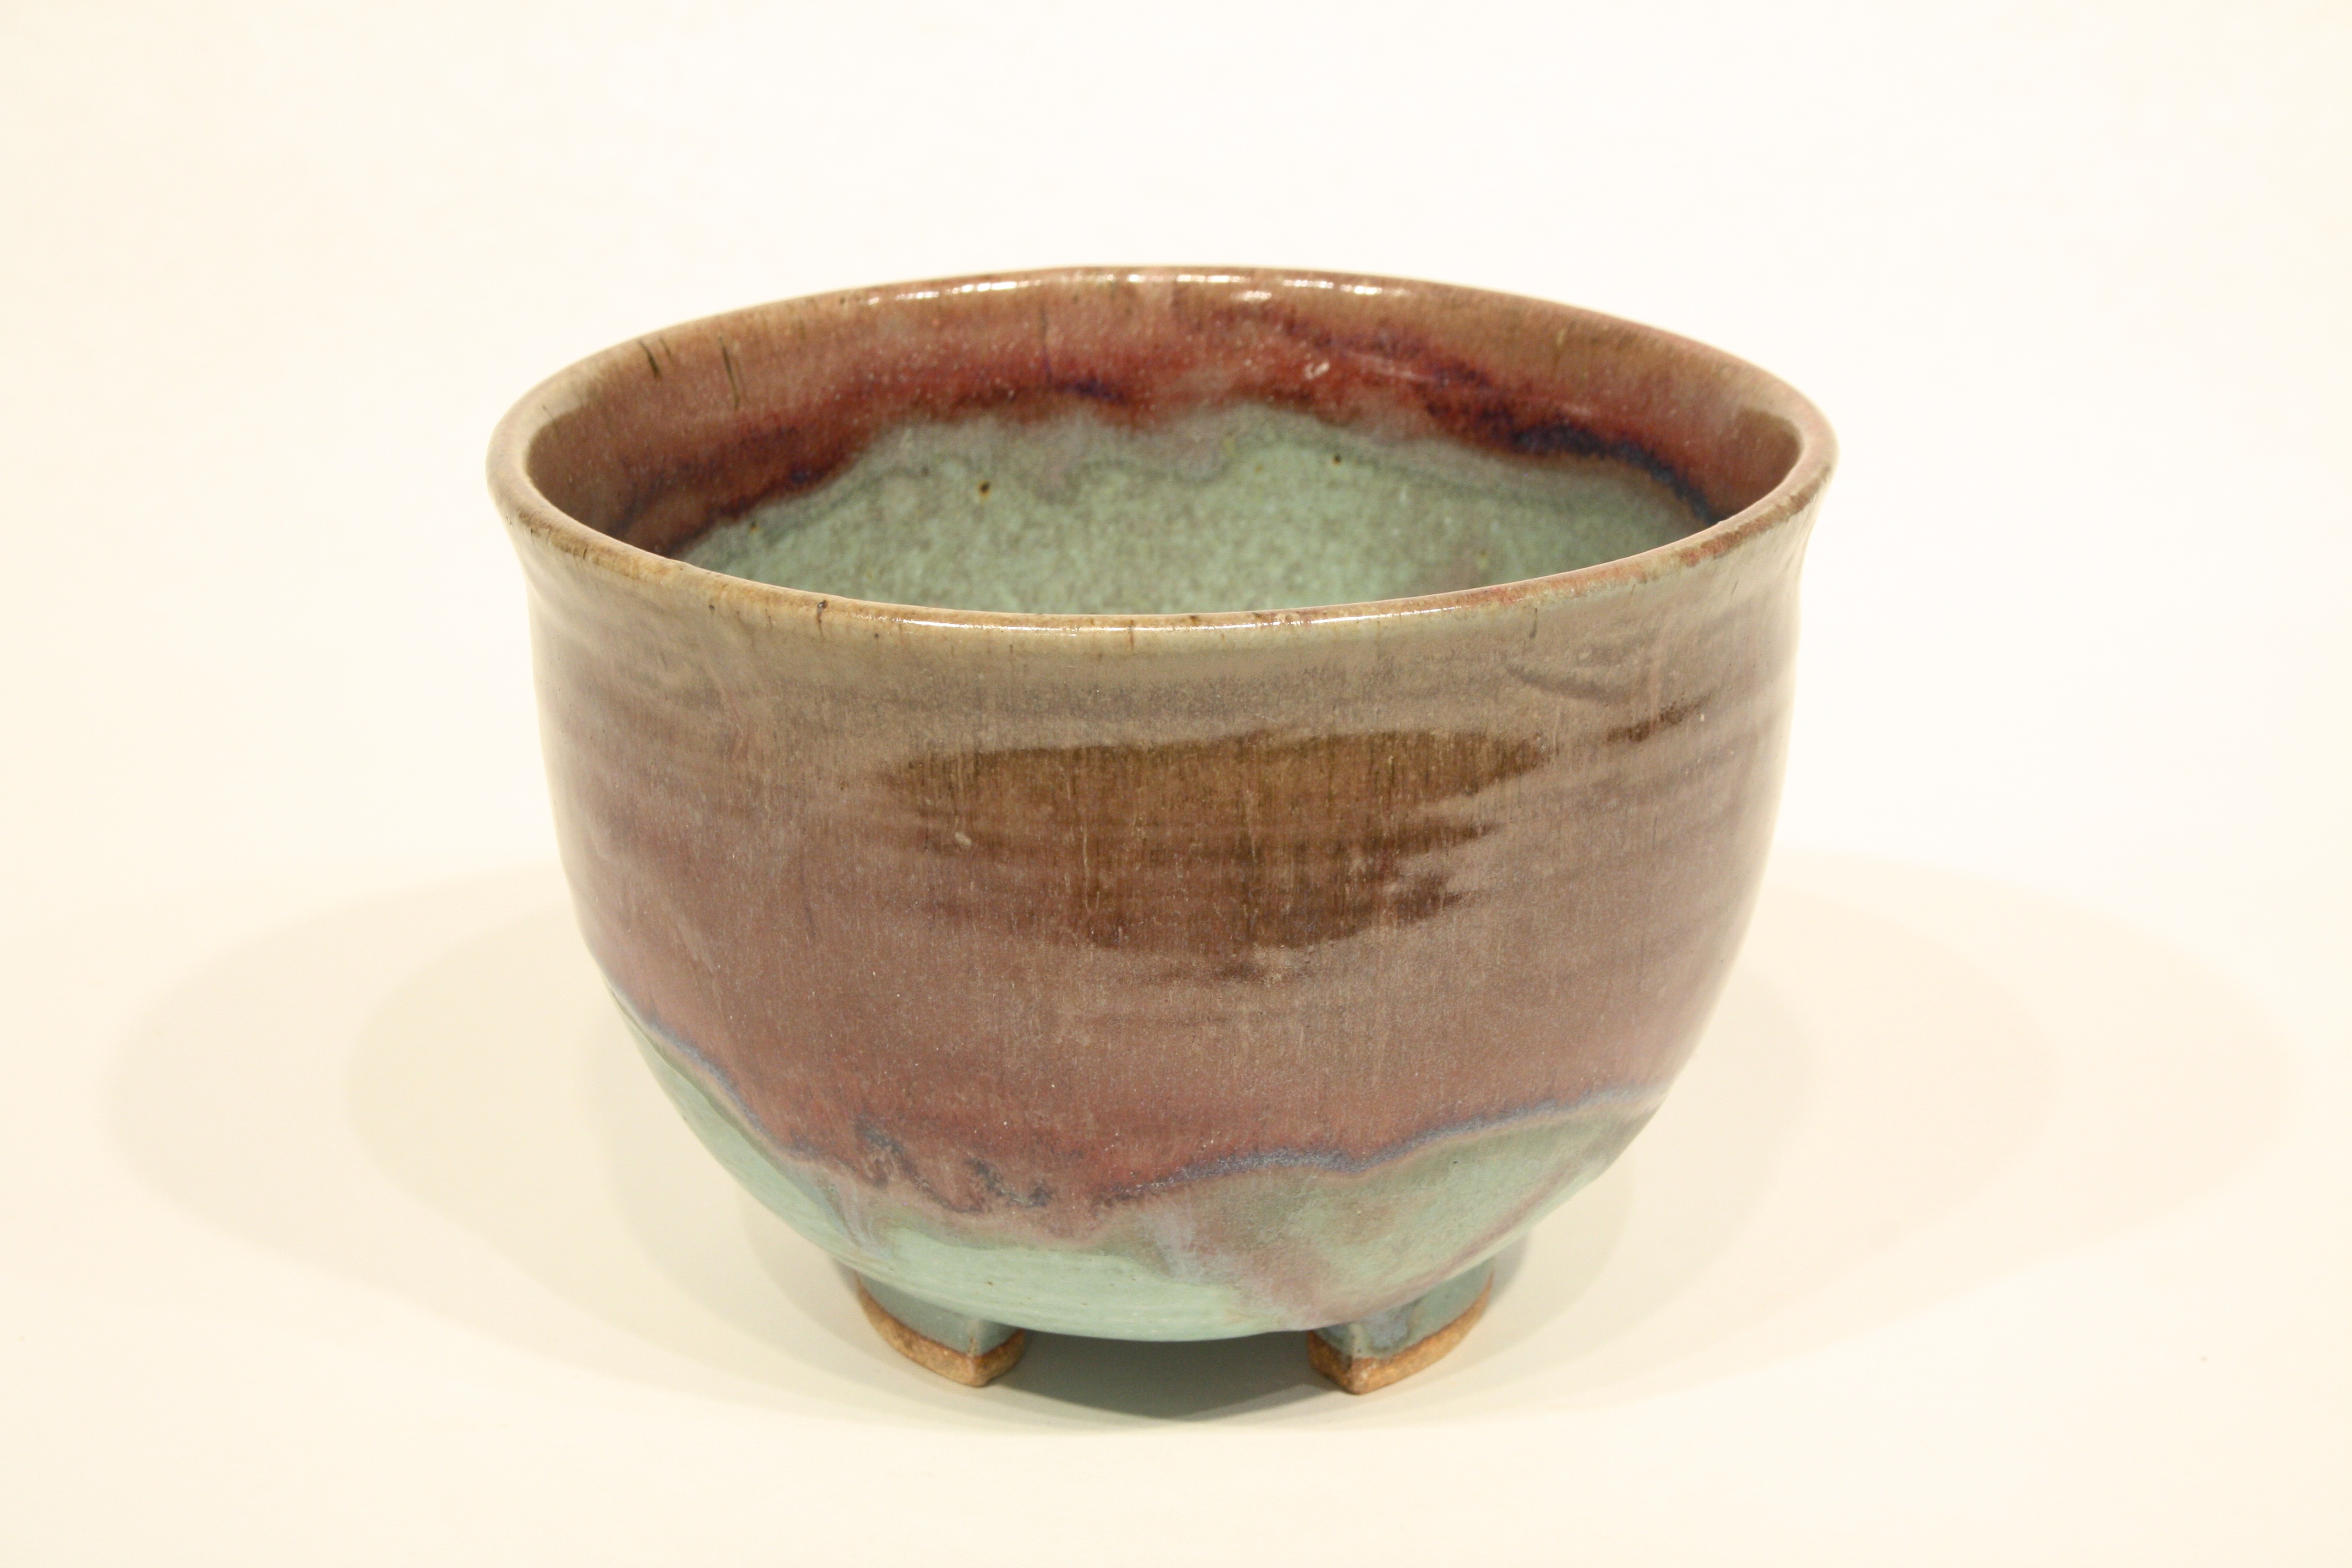 Elegant ceramic bowl with green and brown colors merging together.